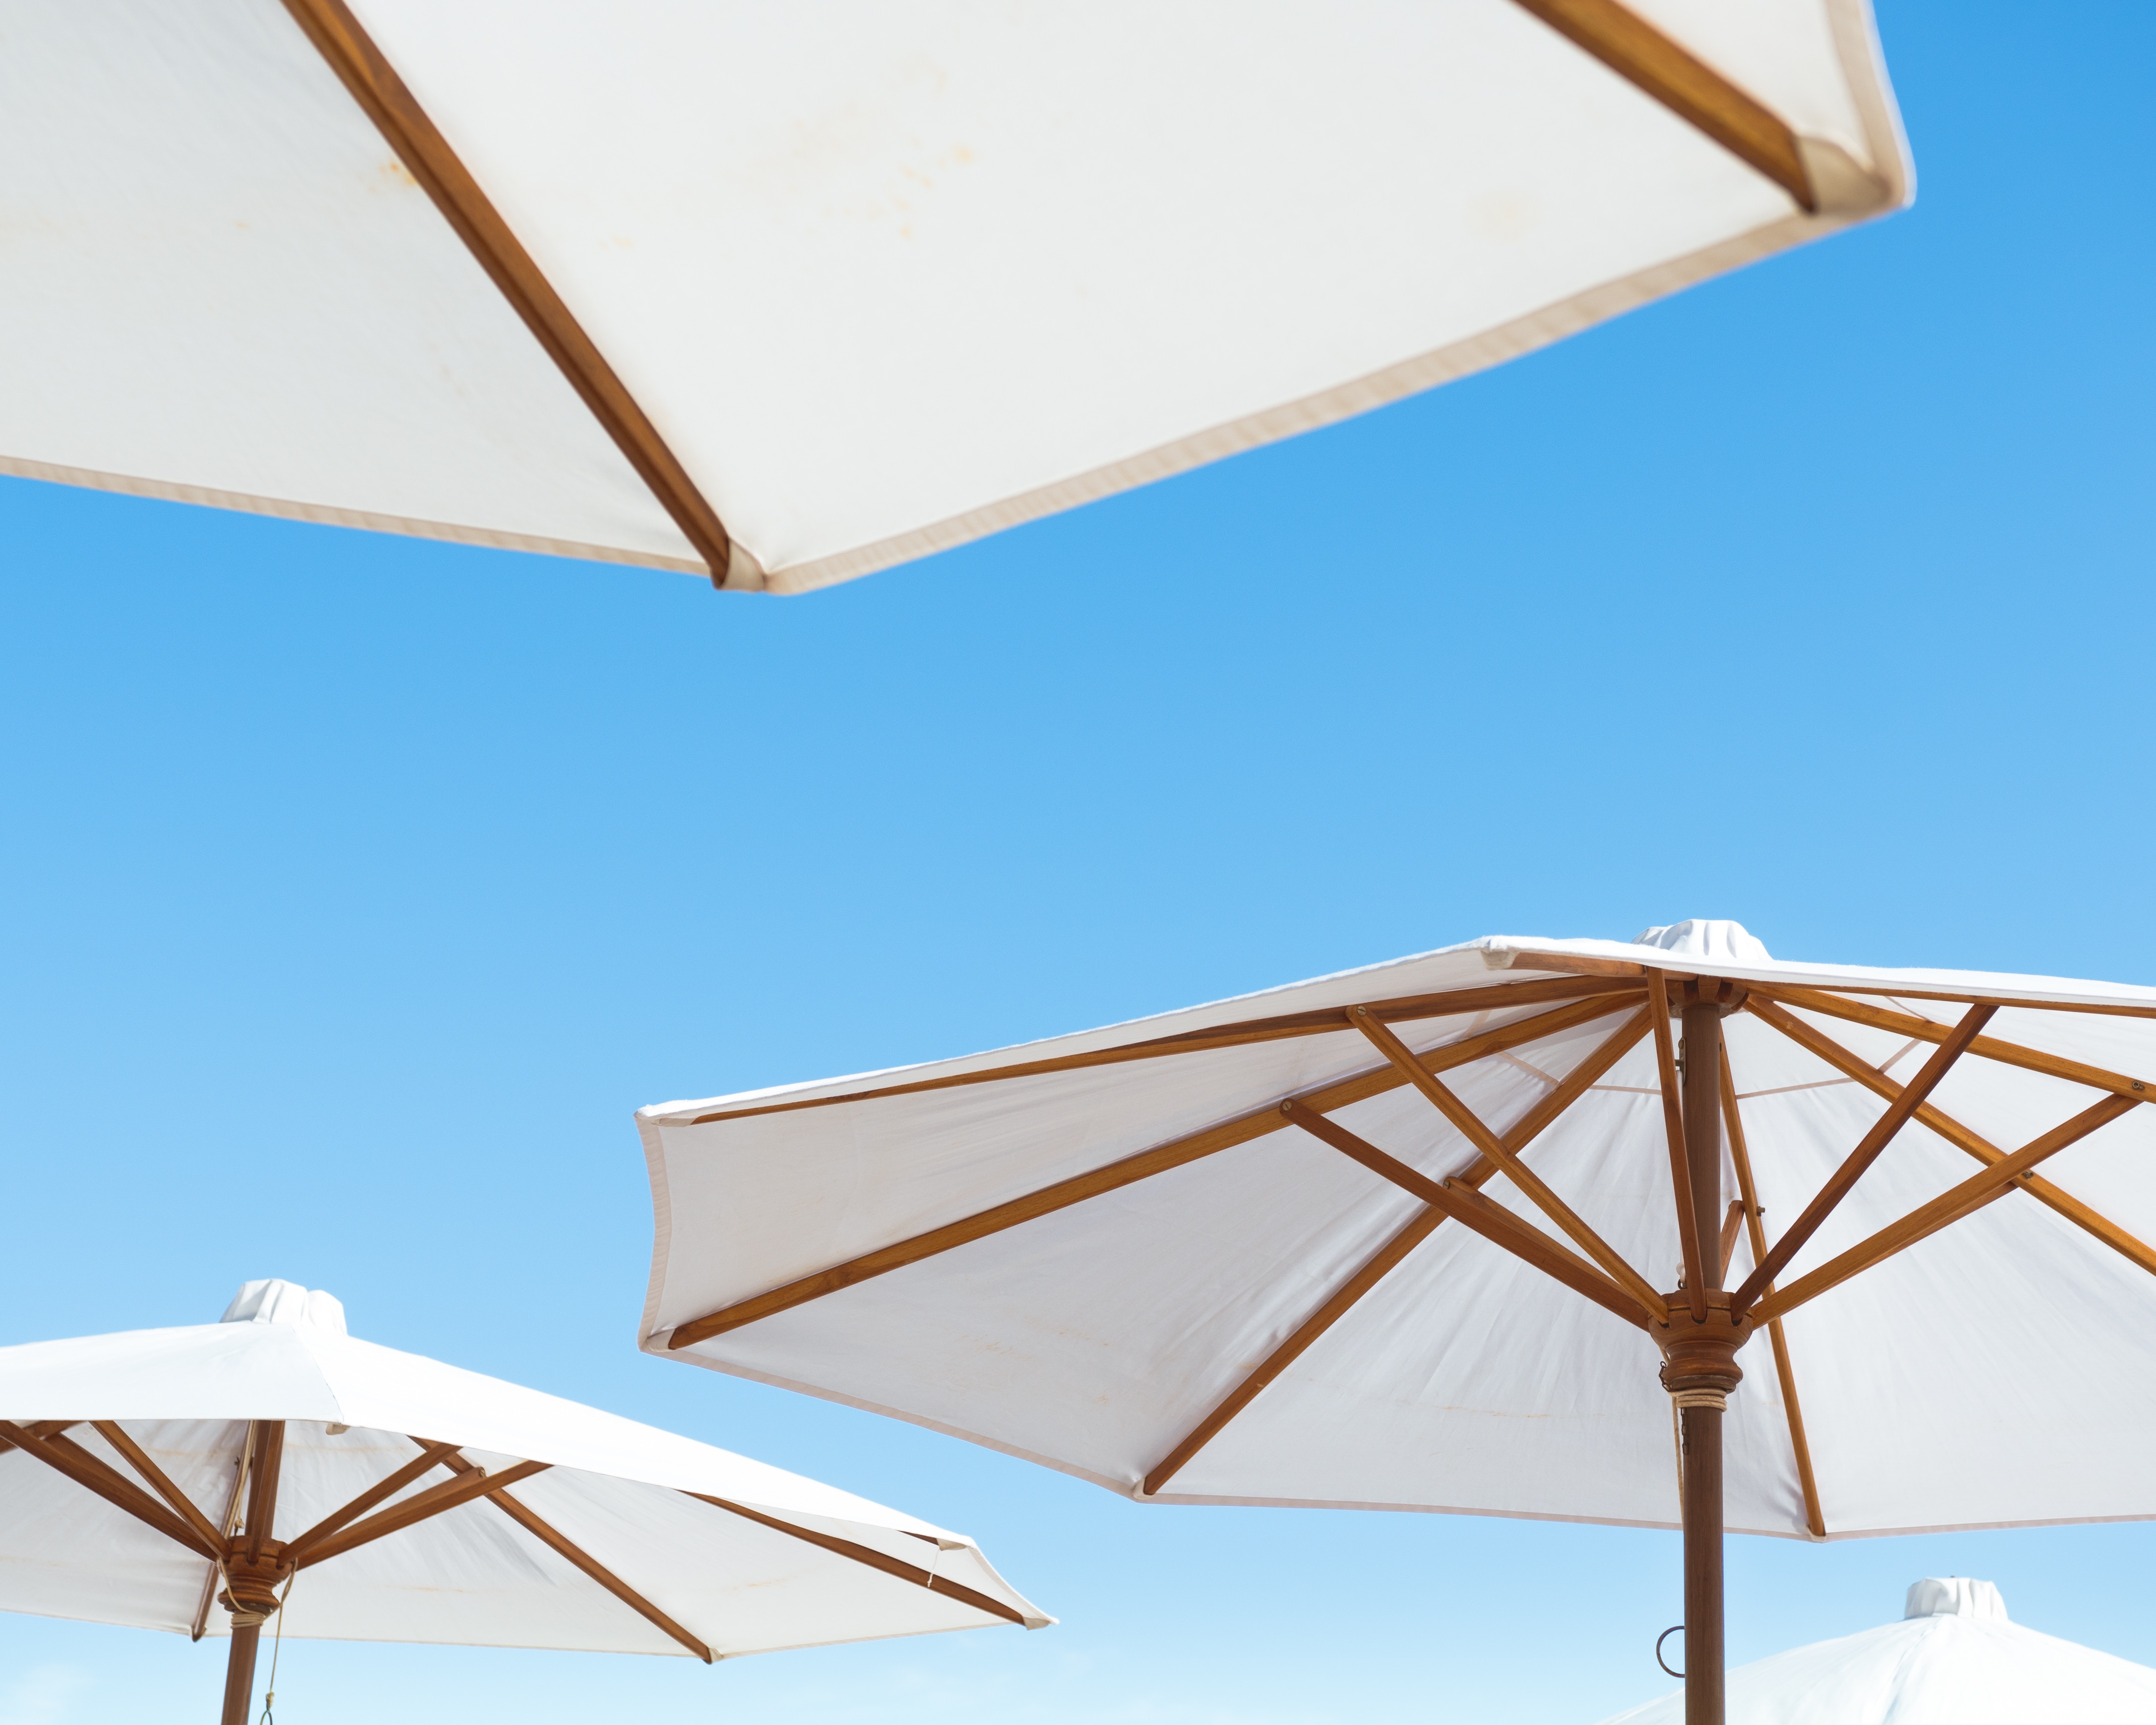 Outdoor Patio Umbrella Ing Guide, What Size Umbrella Should I Get For A 48 Inch Table